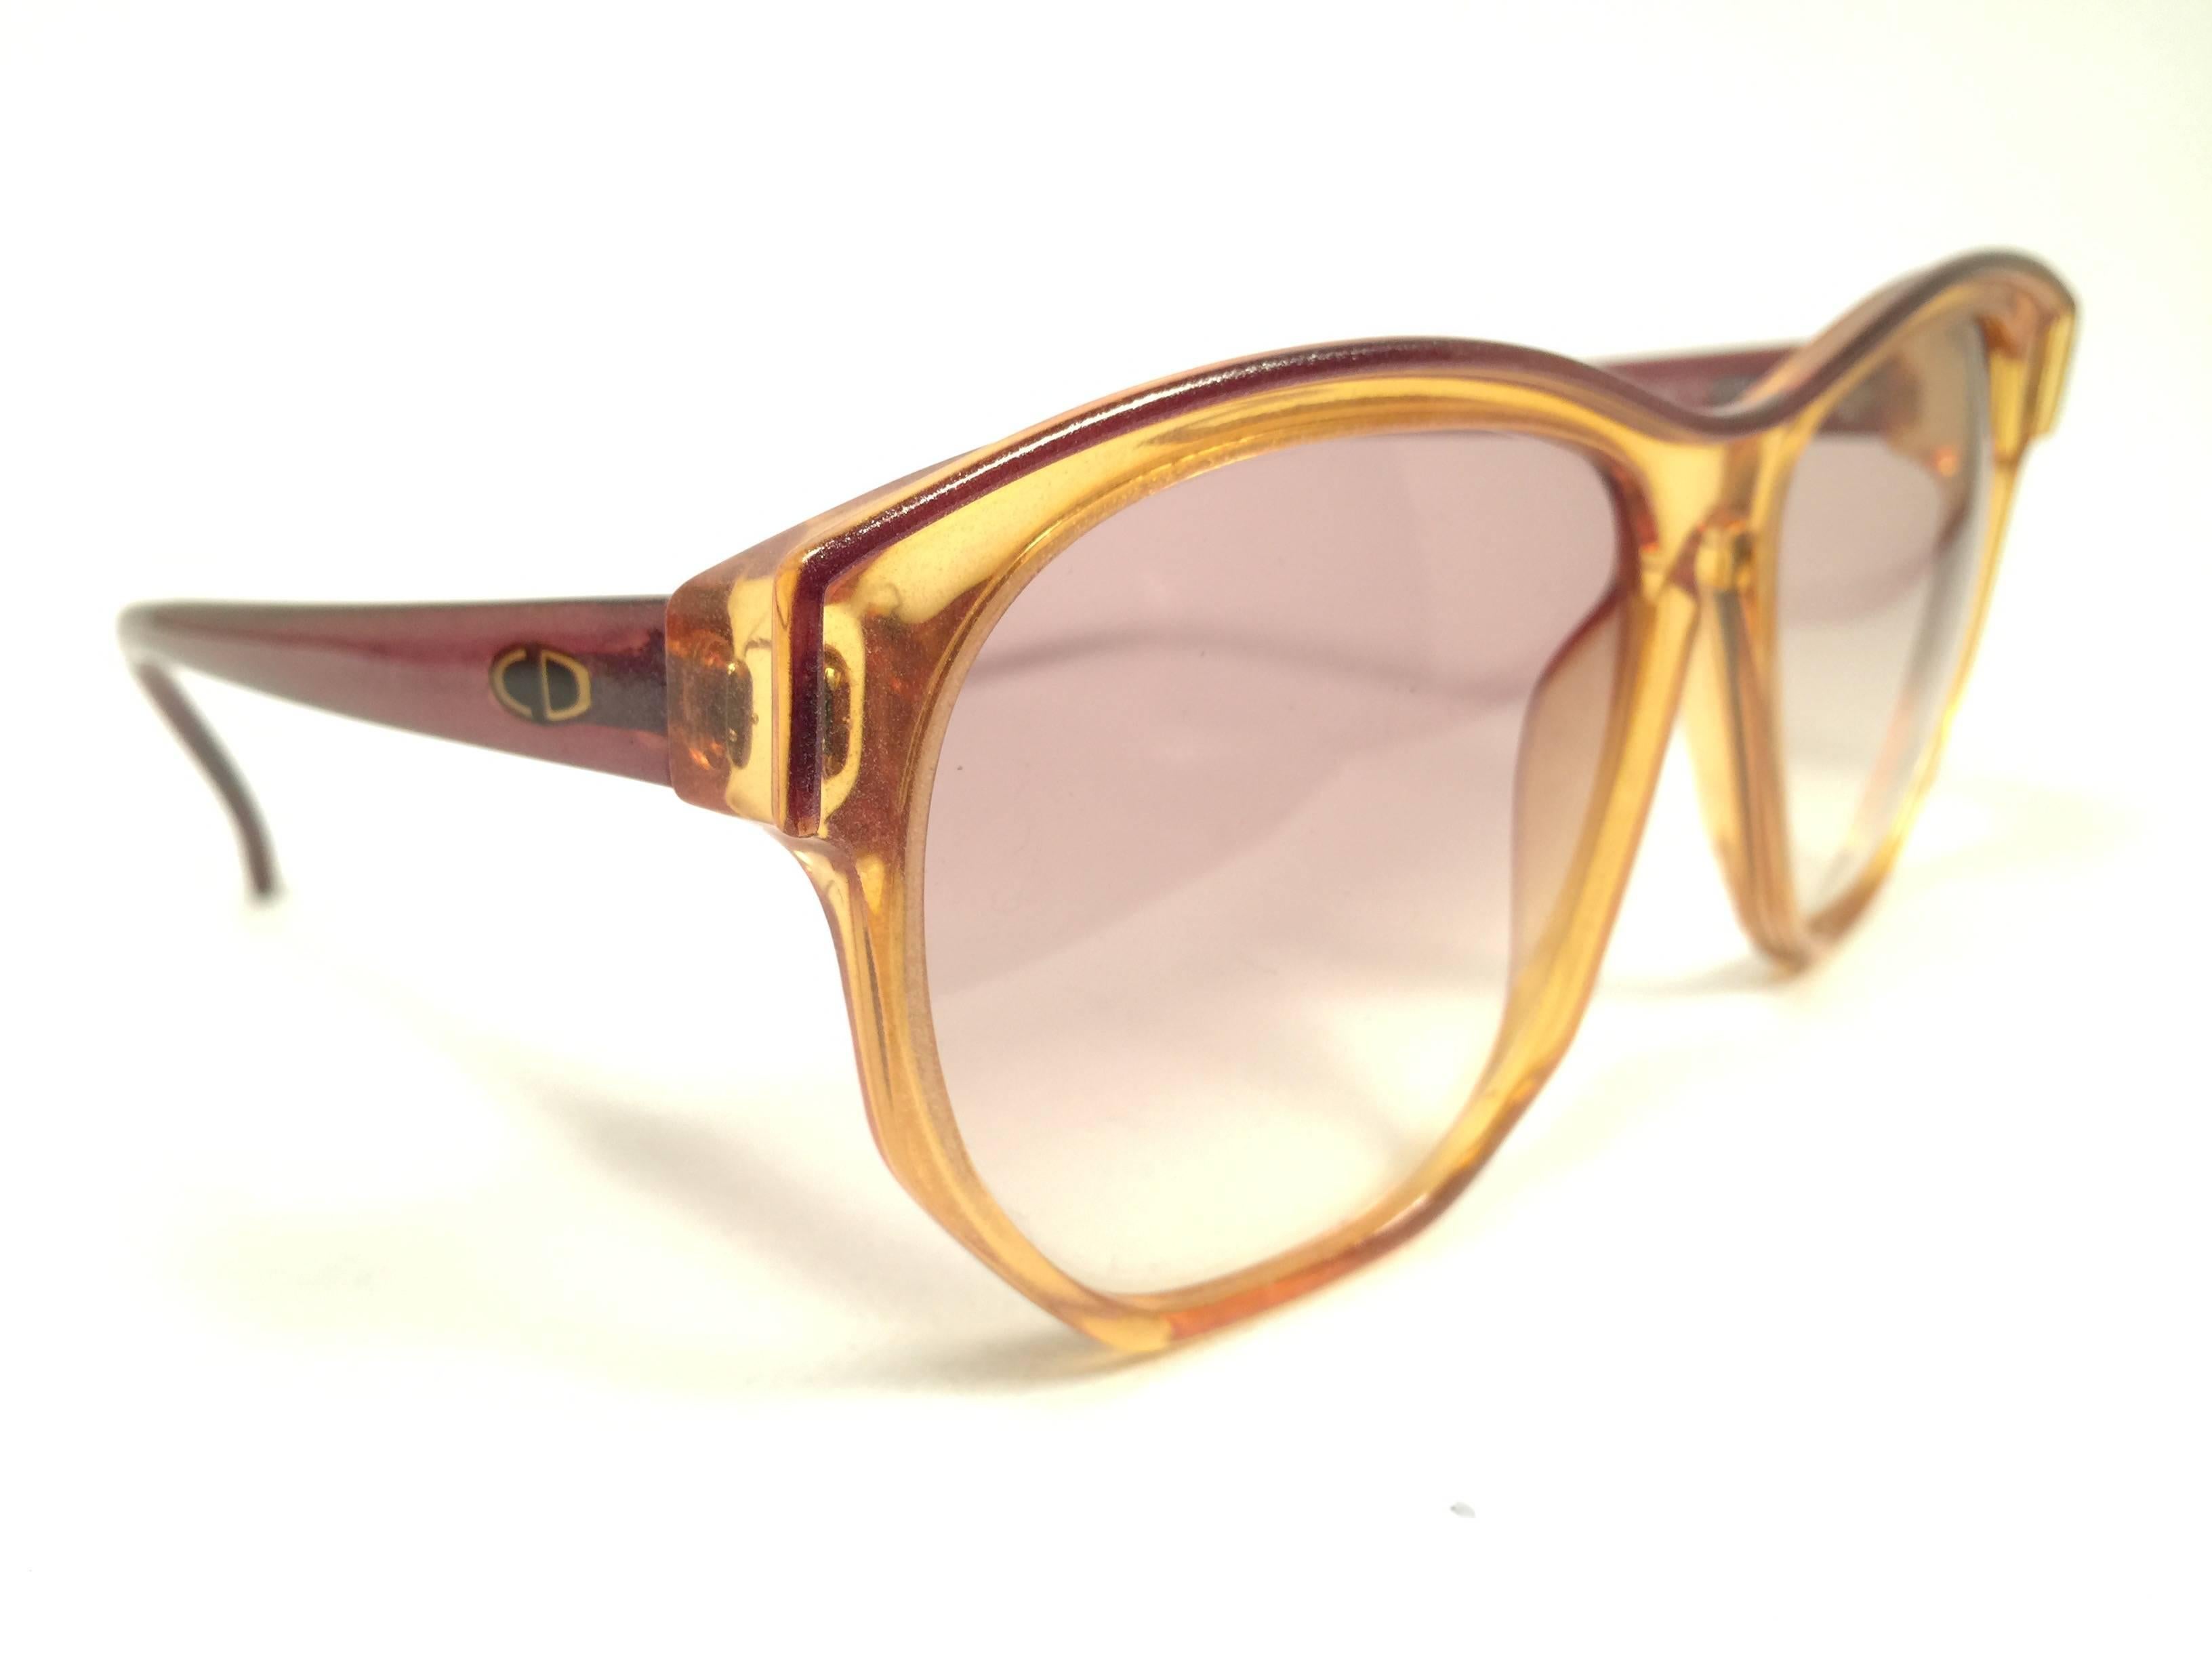 Mint Vintage Christian Dior 2093 Oversized amber translucent 1980's frame with spotless lenses.   
Made in Germany.  

Comes with its original silver Christian Dior Lunettes sleeve.